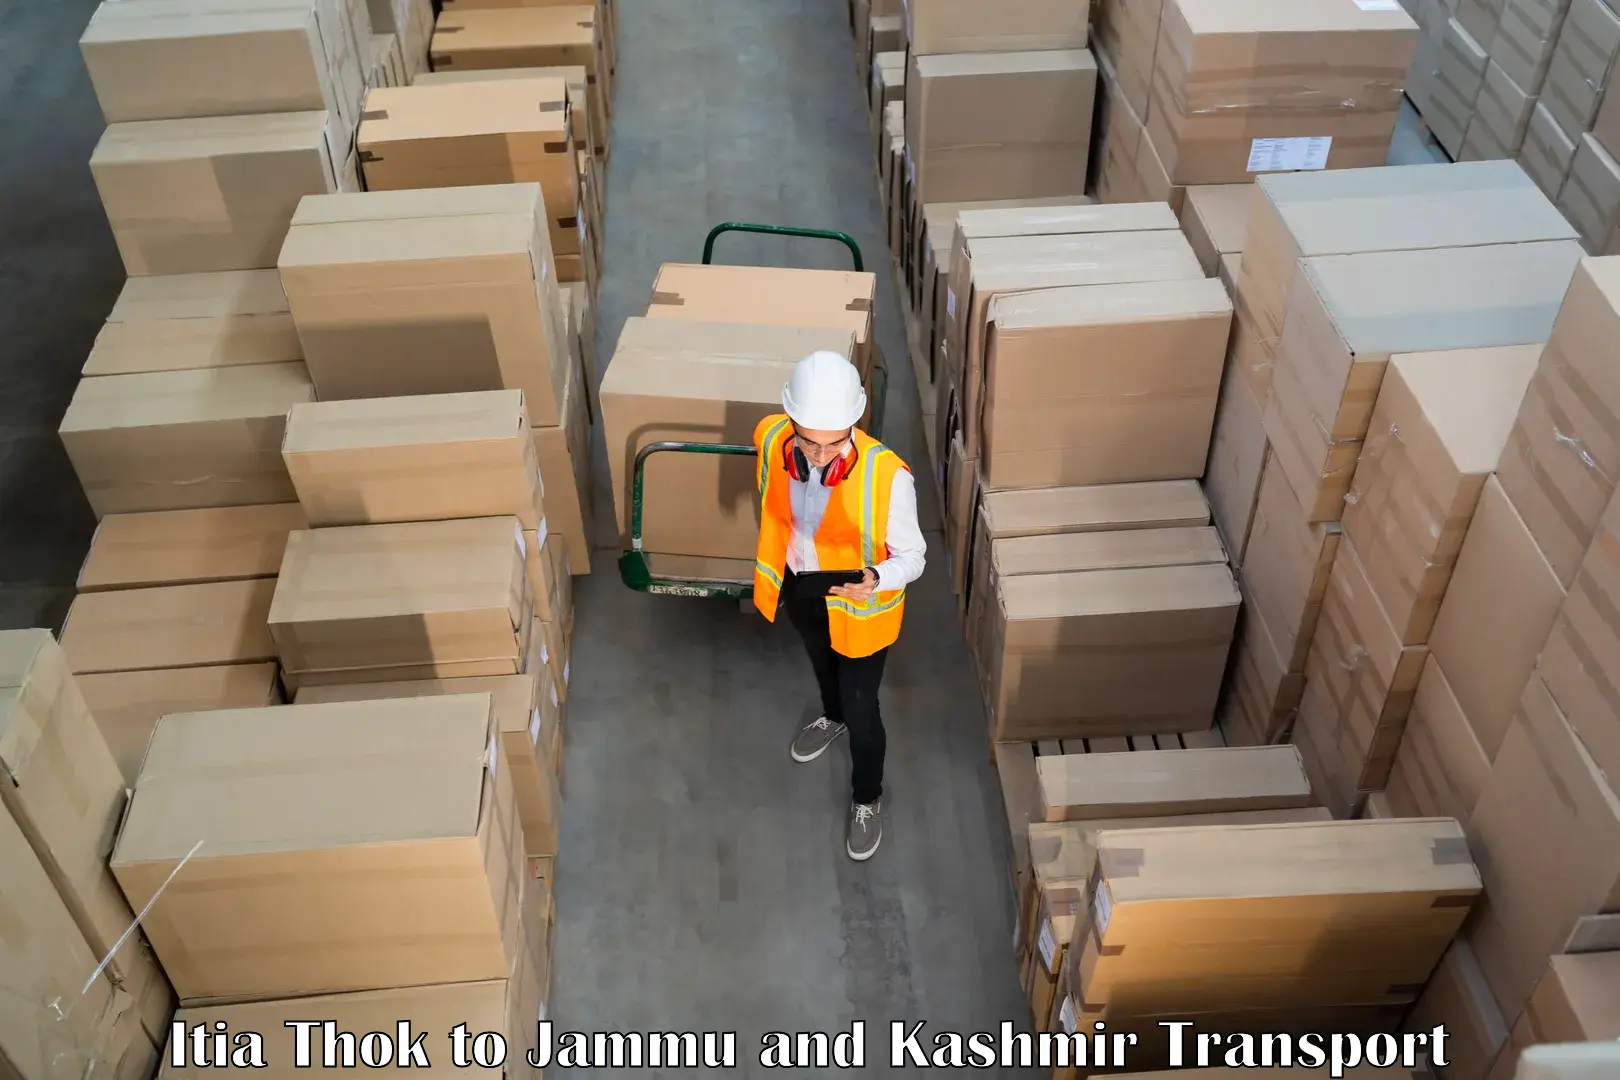 Daily parcel service transport Itia Thok to Baramulla